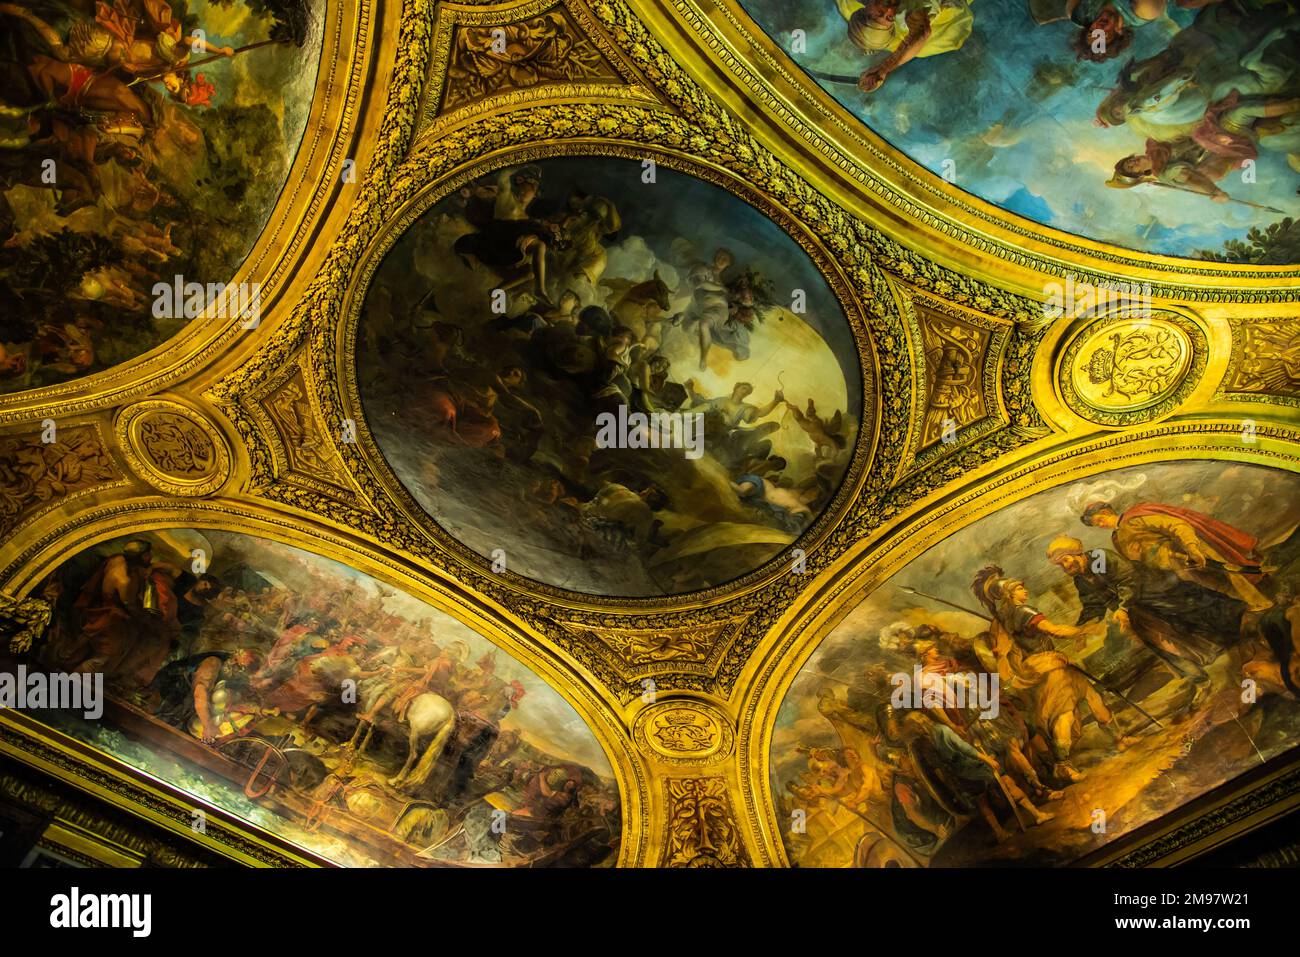 Paris, France - Dec. 28 2022: The highly decorative chandelier in Versaille Palace Stock Photo